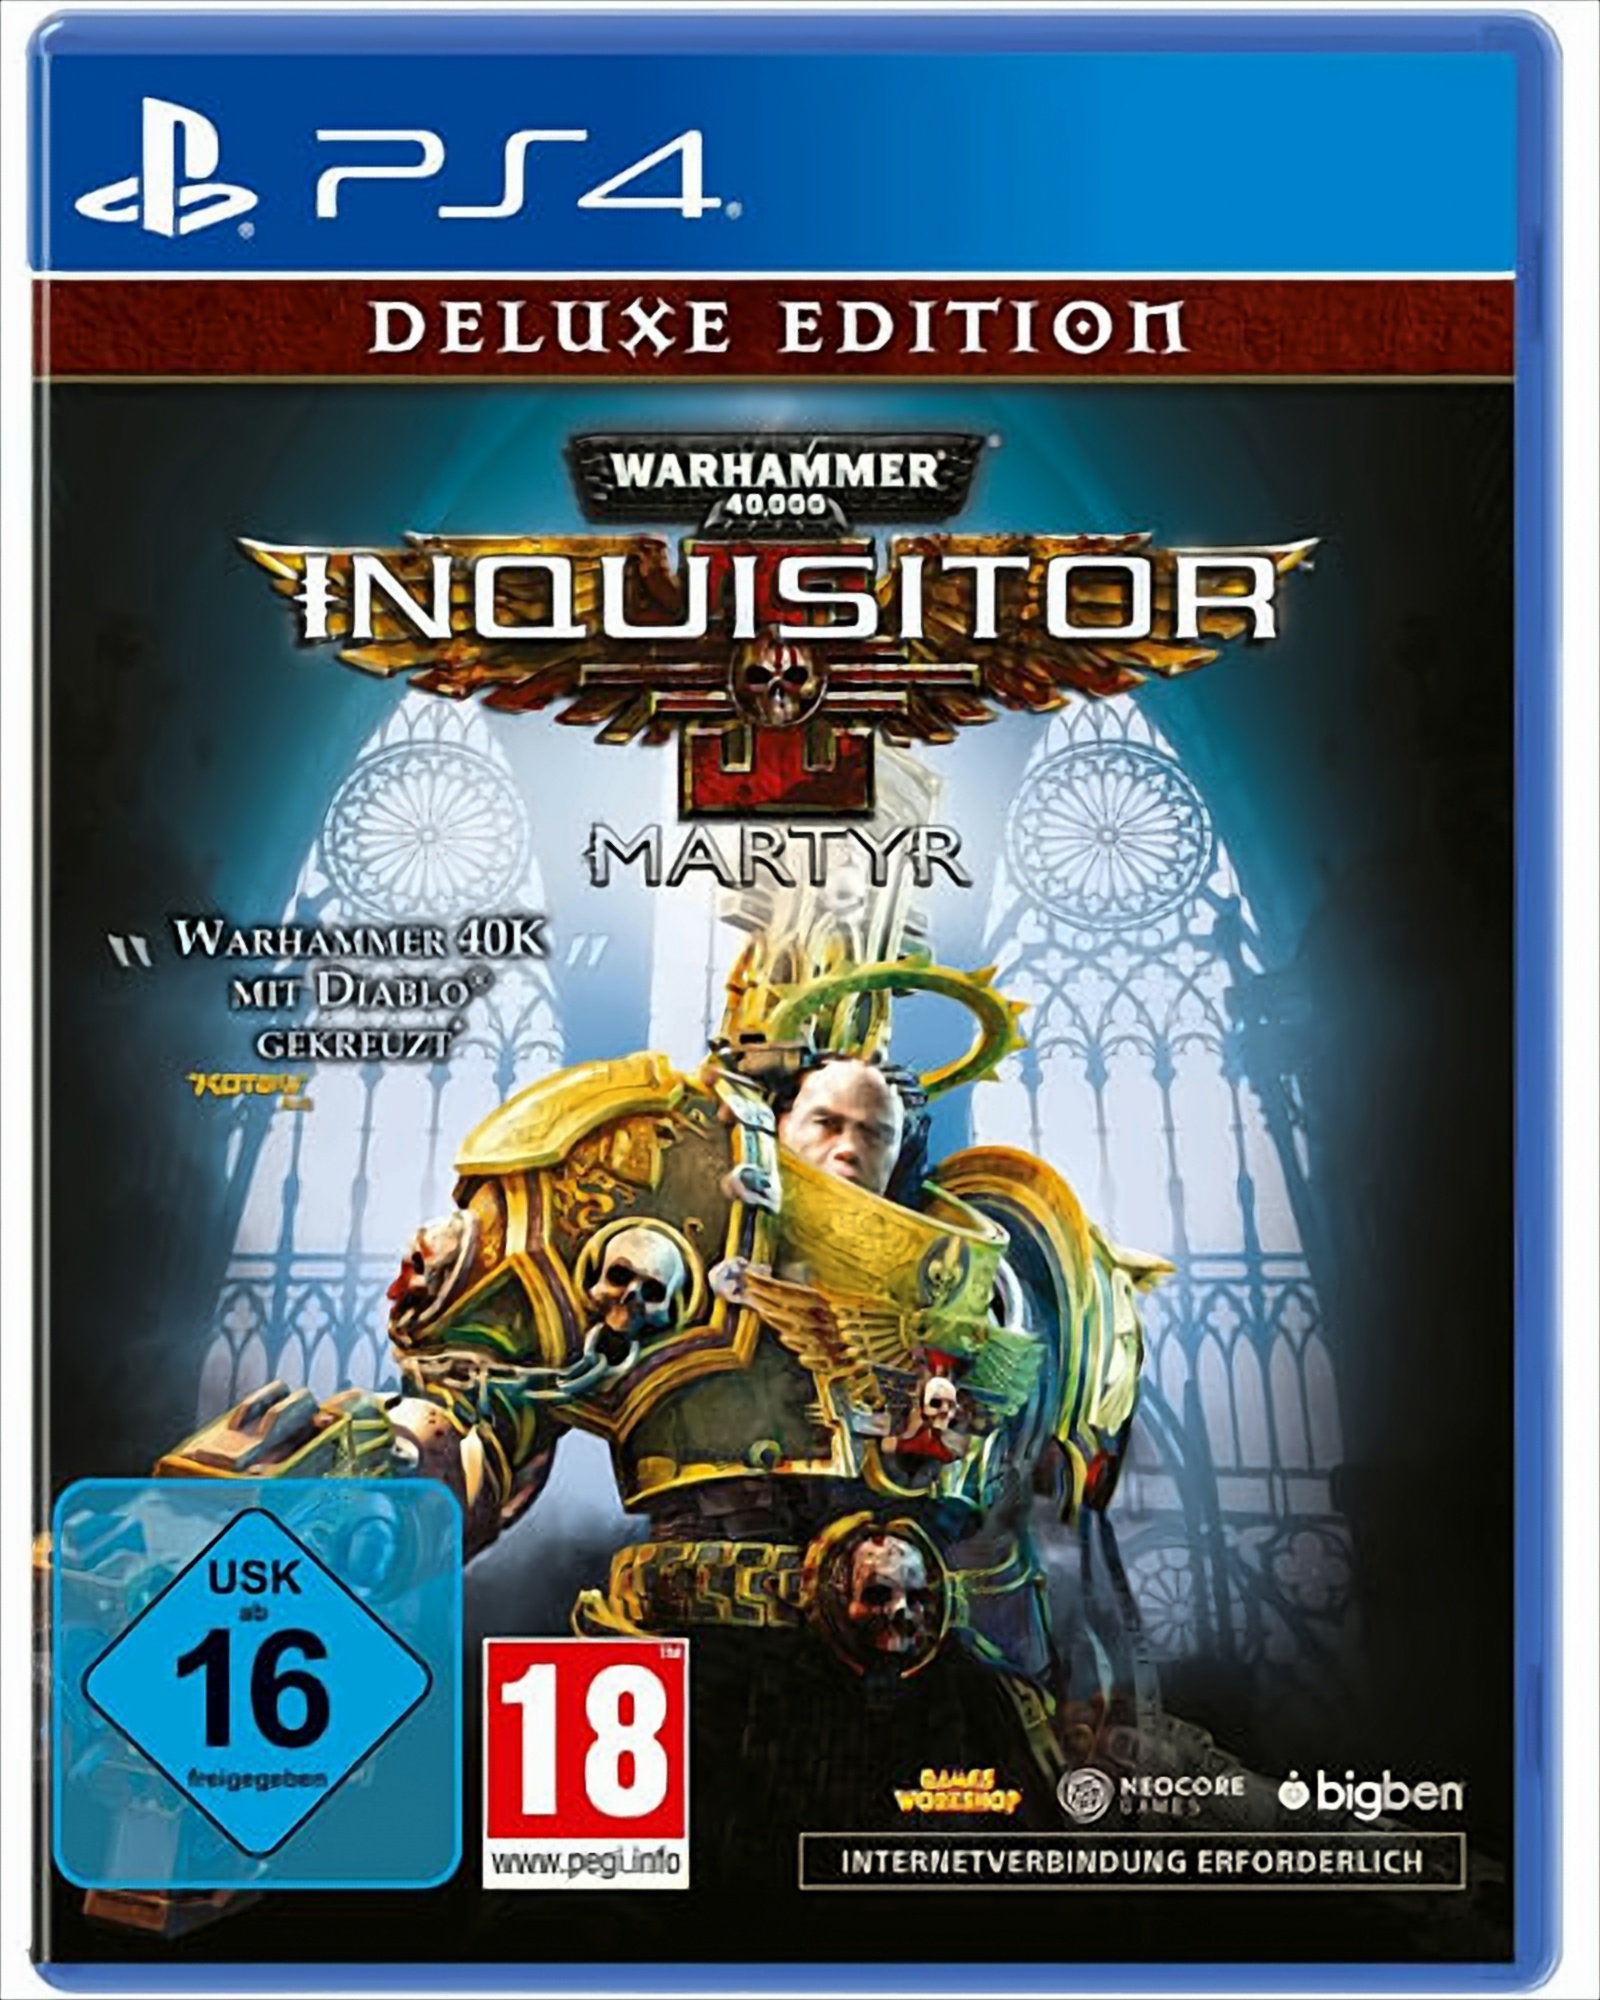 DeLuxe 40.000 Warhammer Martyr [PlayStation - PS4 Inquisitor Edition 4] -